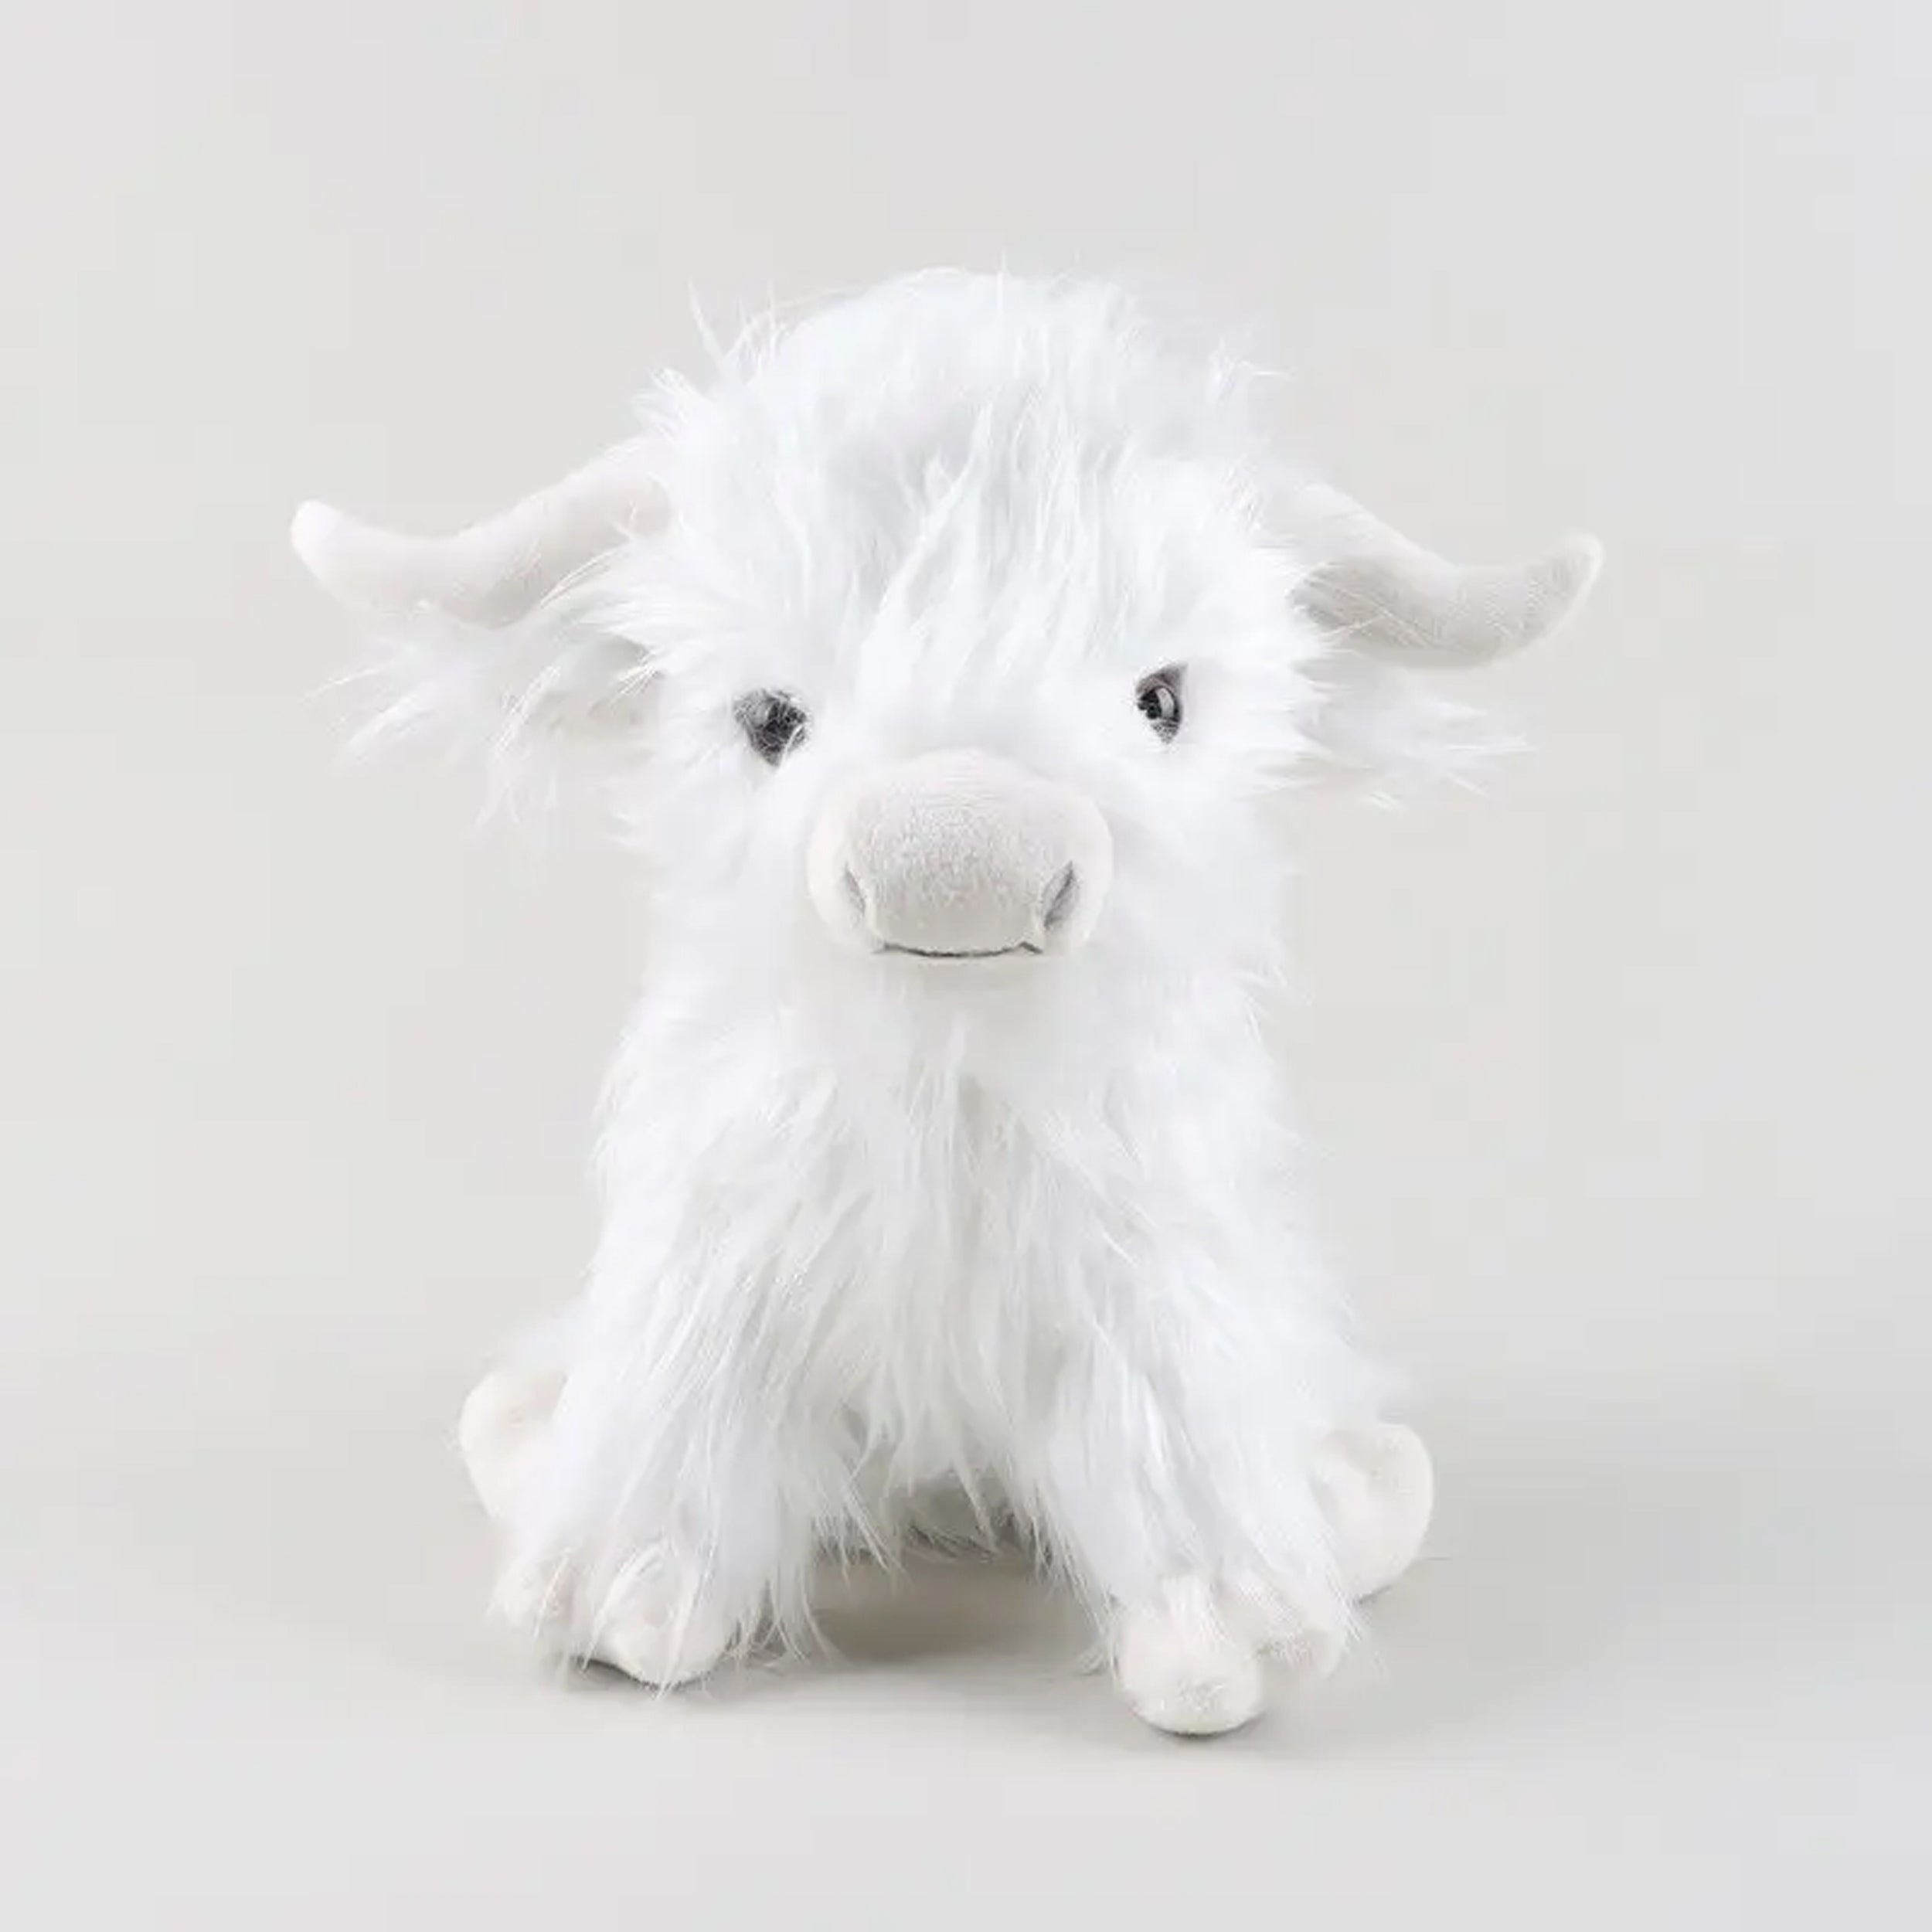 Adorable Cow and Bull Stuffed Animal Plushie Cattle Figure Toys